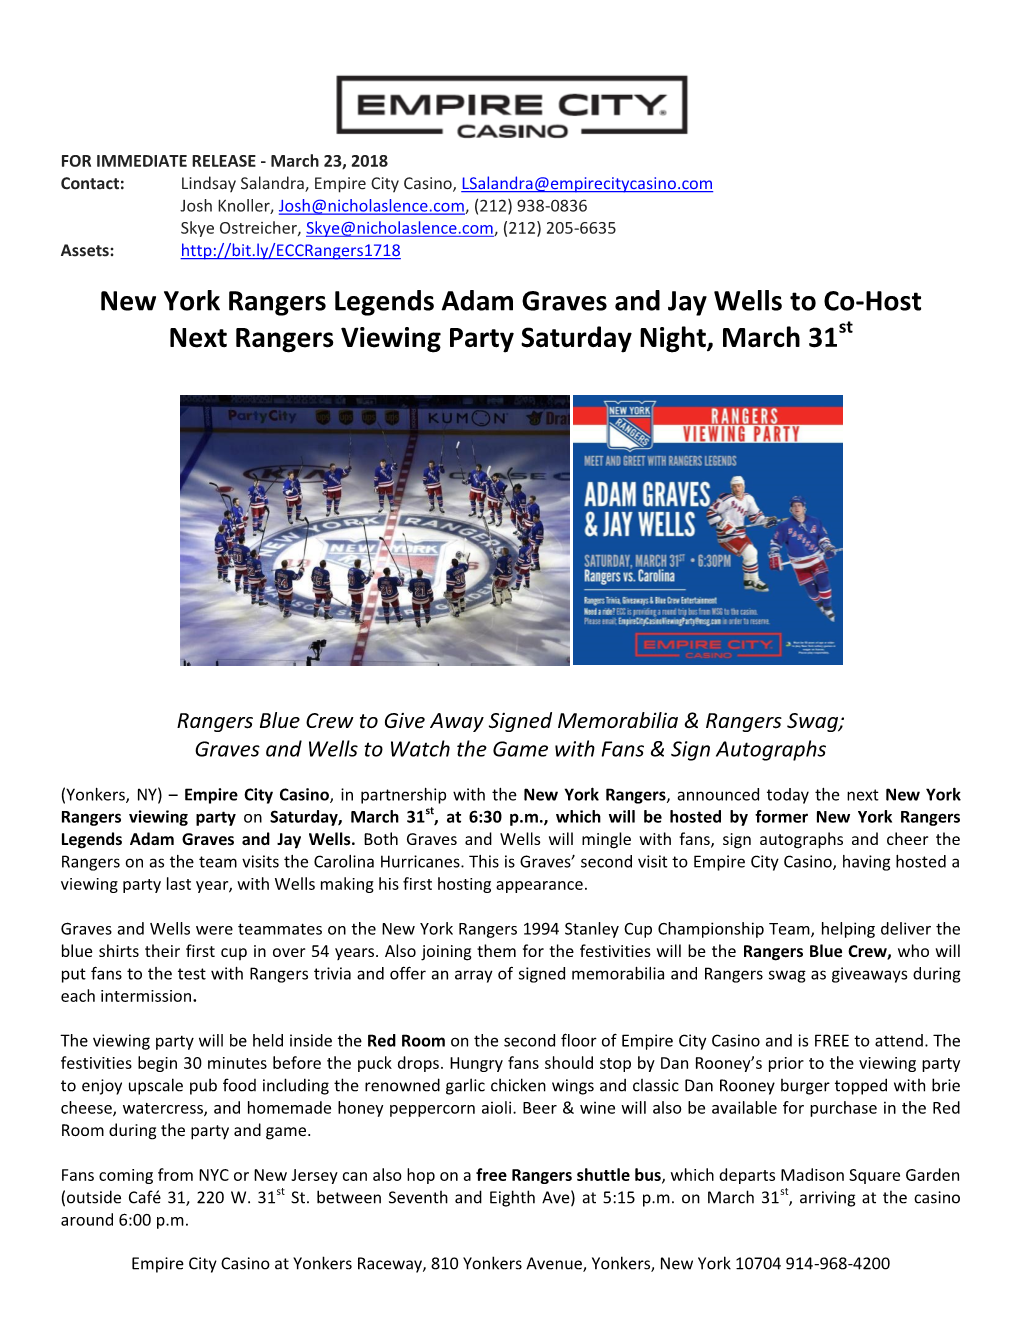 New York Rangers Legends Adam Graves and Jay Wells to Co-Host Next Rangers Viewing Party Saturday Night, March 31St